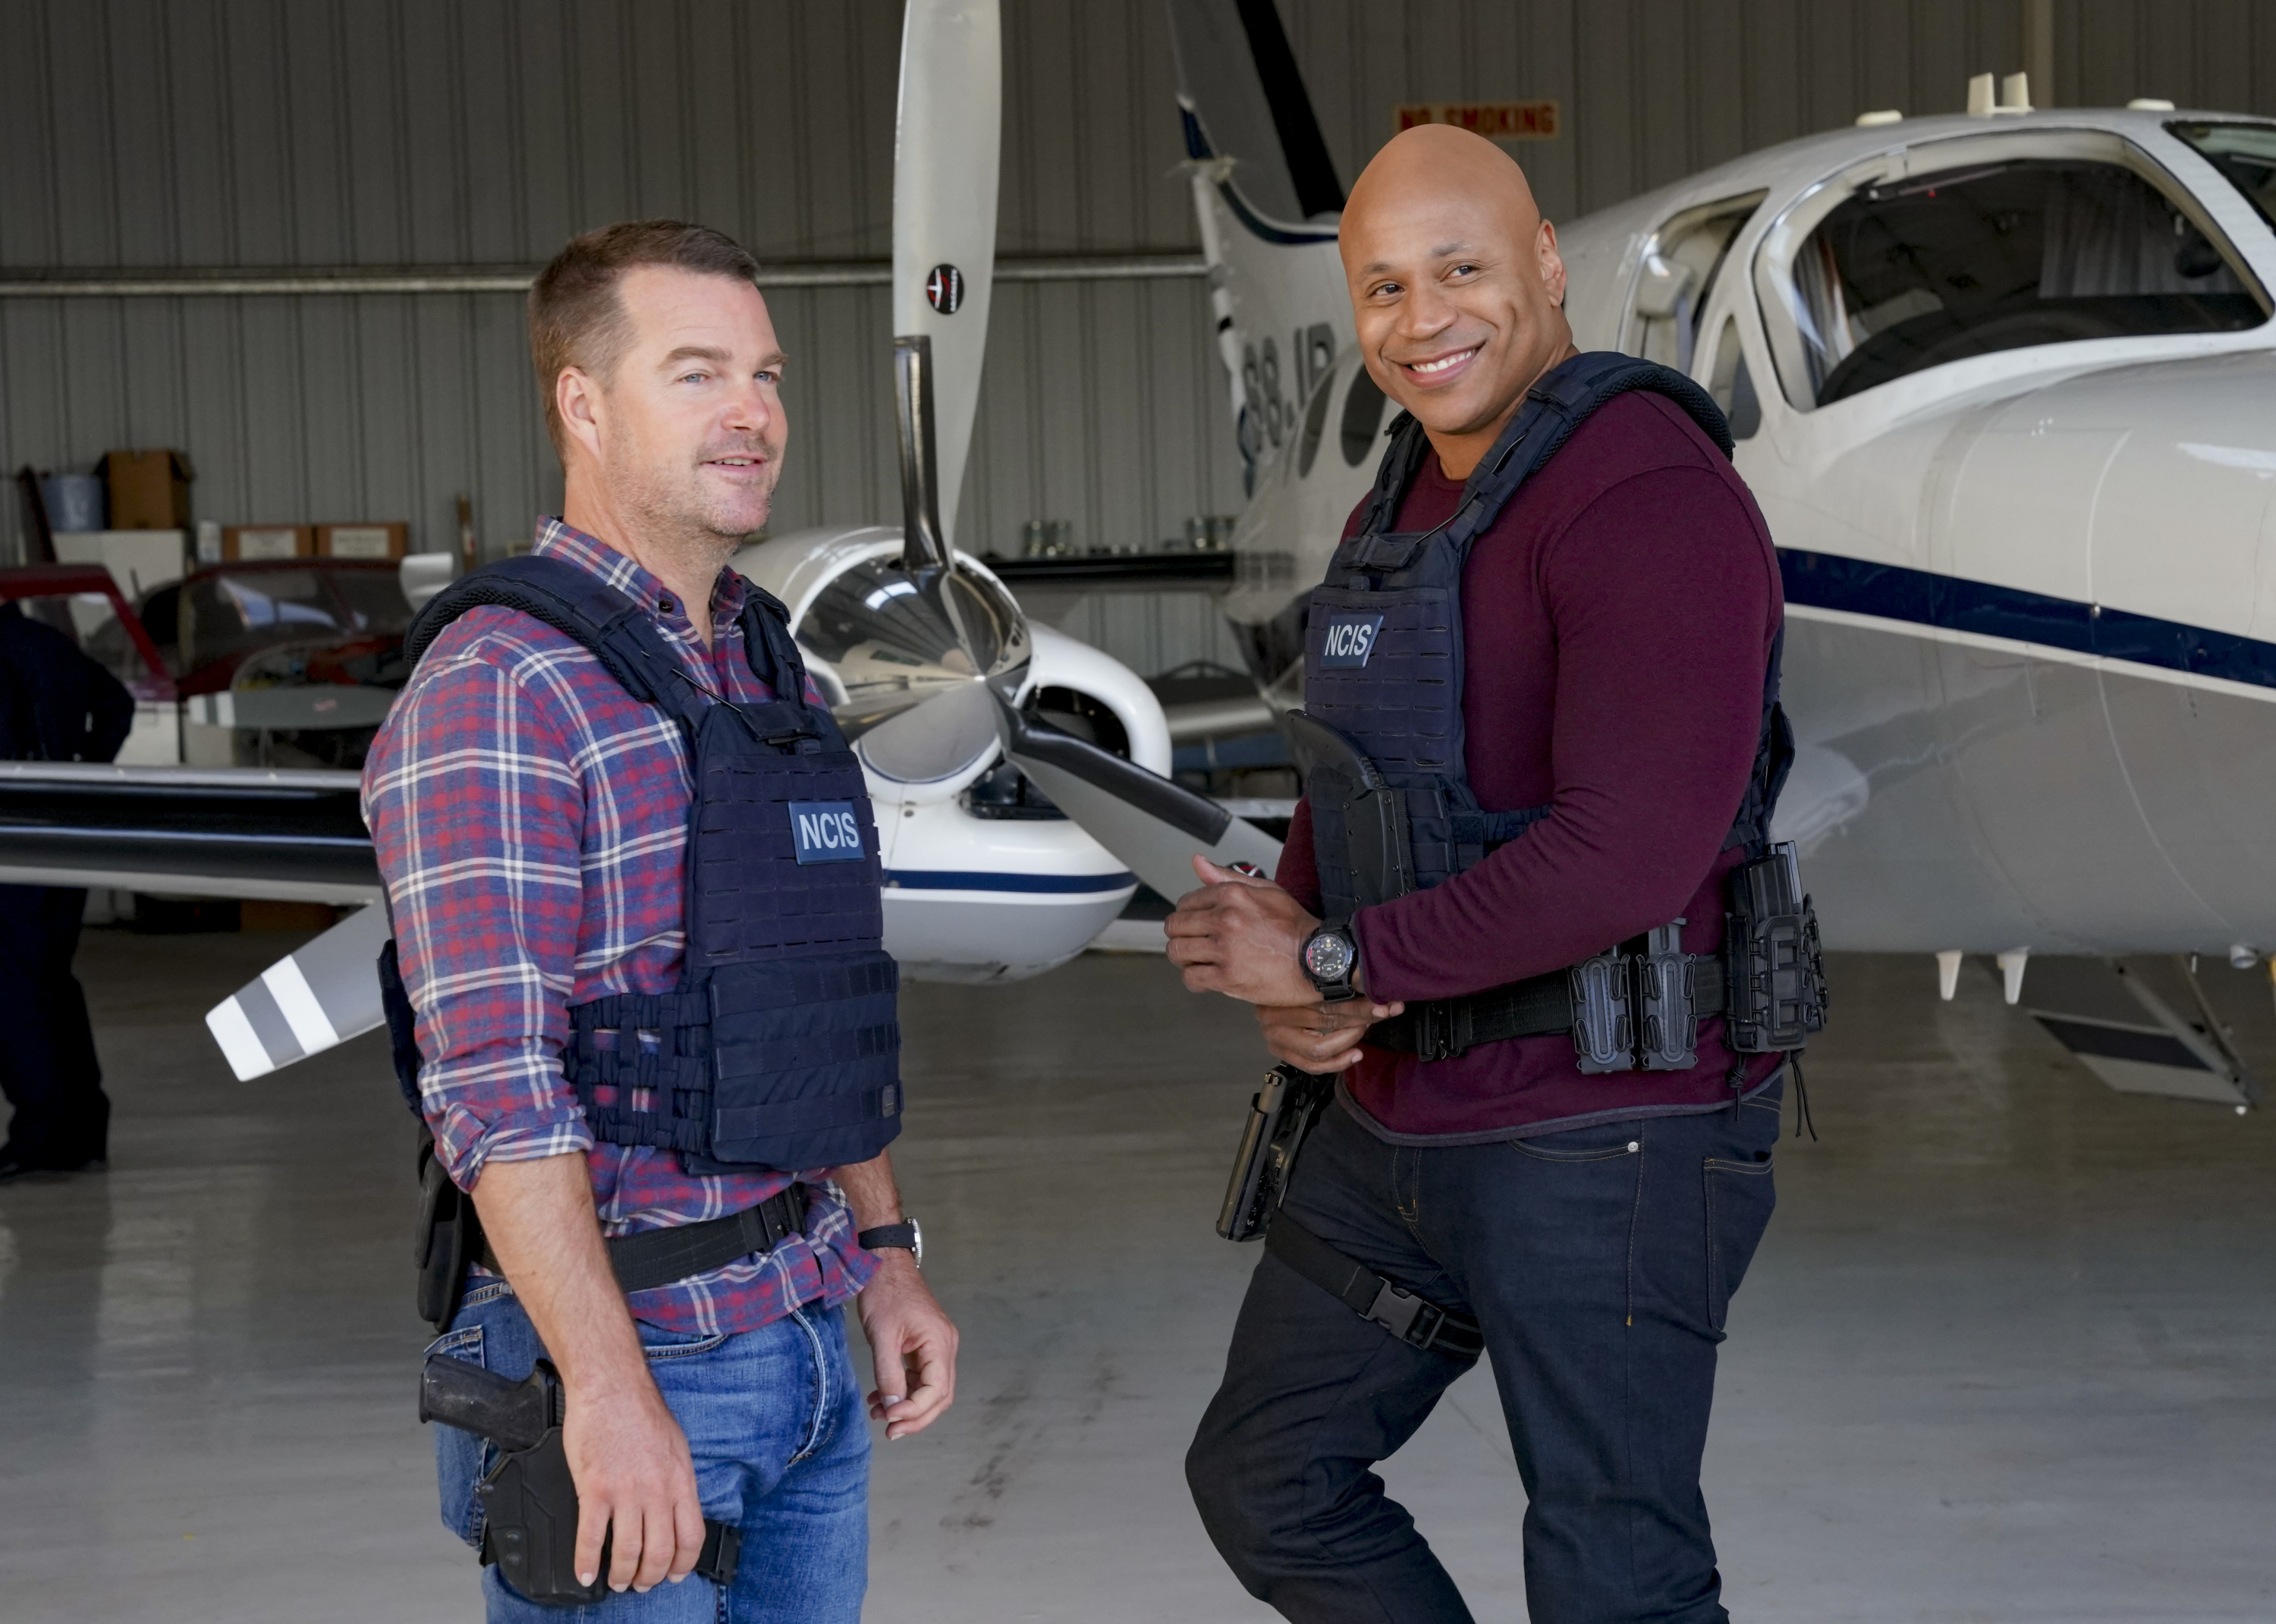 Chris O'Donnell (Special Agent G. Callen) and LL Cool J (Special Agent Sam Hanna) on the set of NCIS Los Angeles | Ron P. Jaffe/CBS via Getty Images